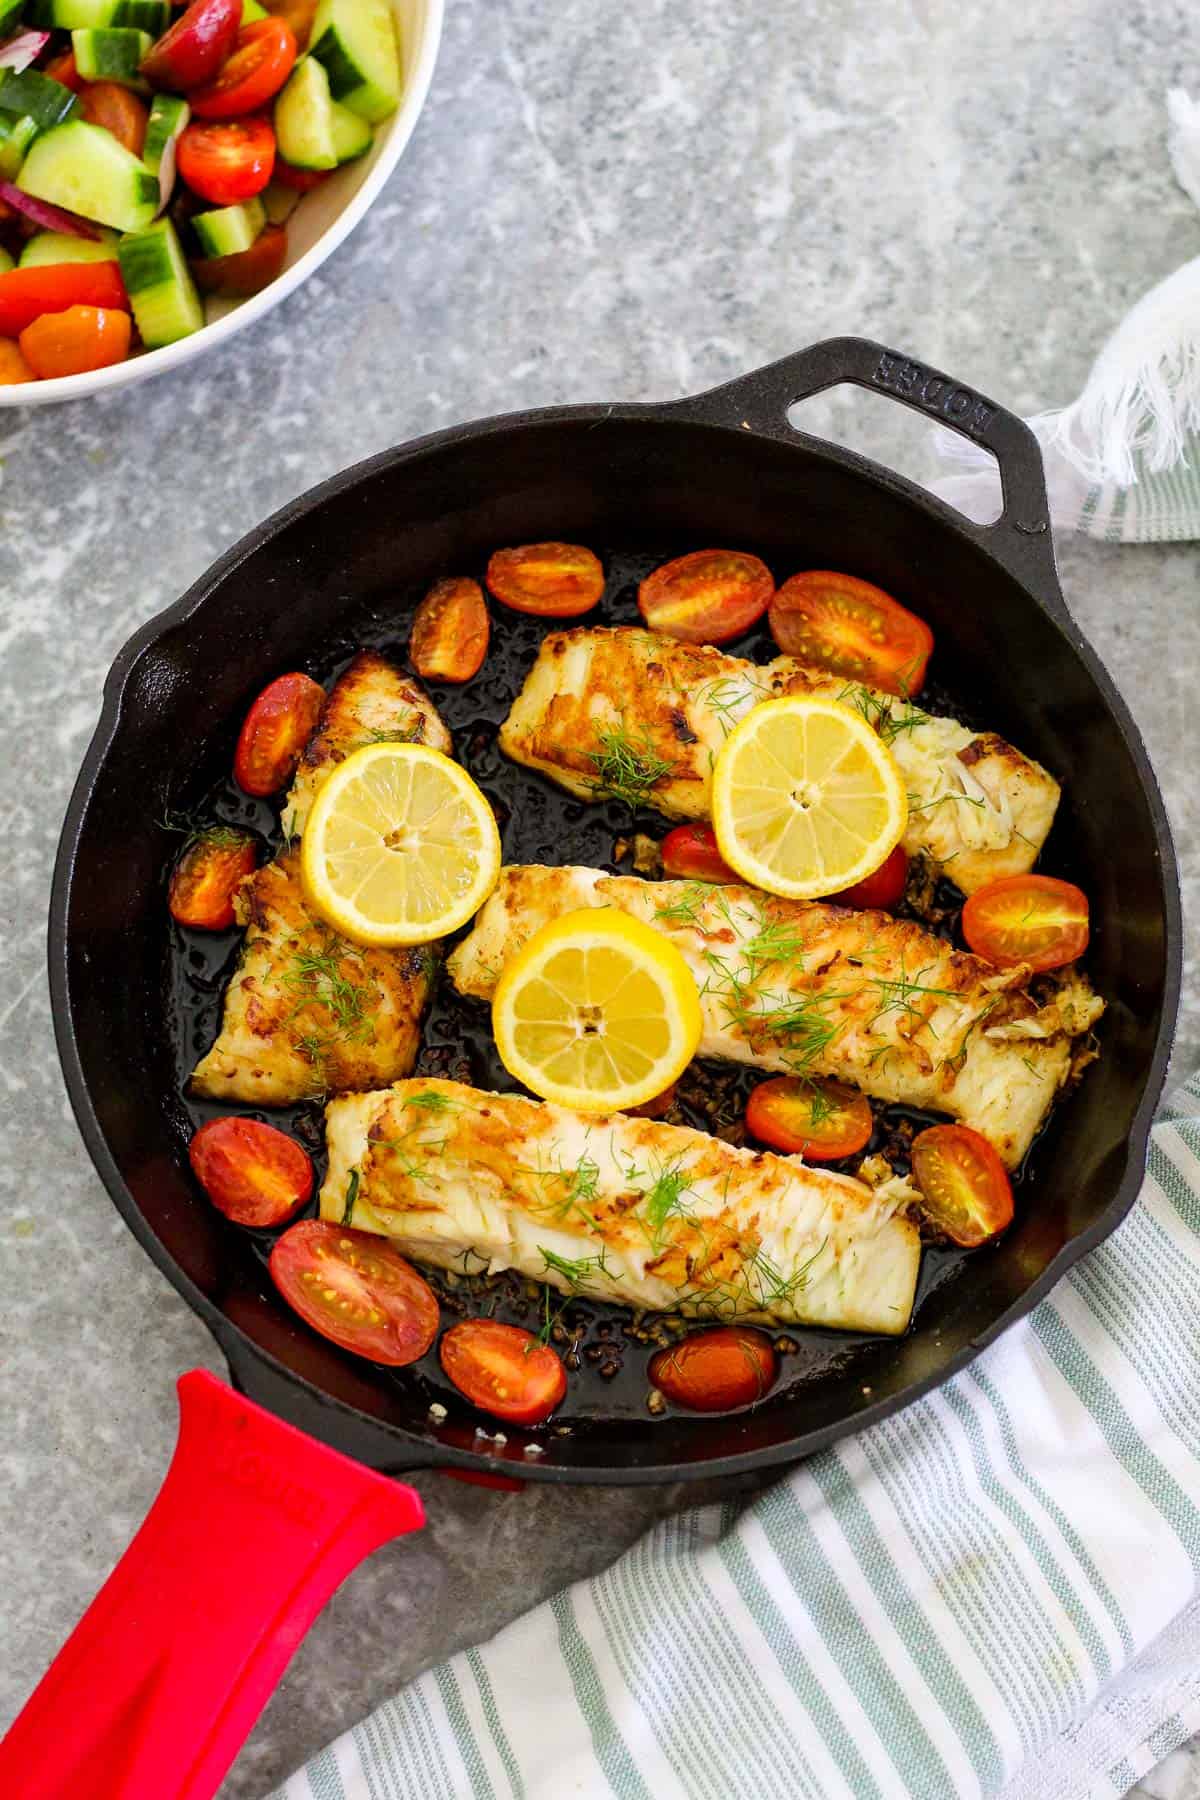 Seafood dinner with halibut fish - this dish is shown cooked on a cast iron skillet. There are 4 fish fillets in the skillet, lemon slices, cherry tomatoes and everything is garnished with dill. 